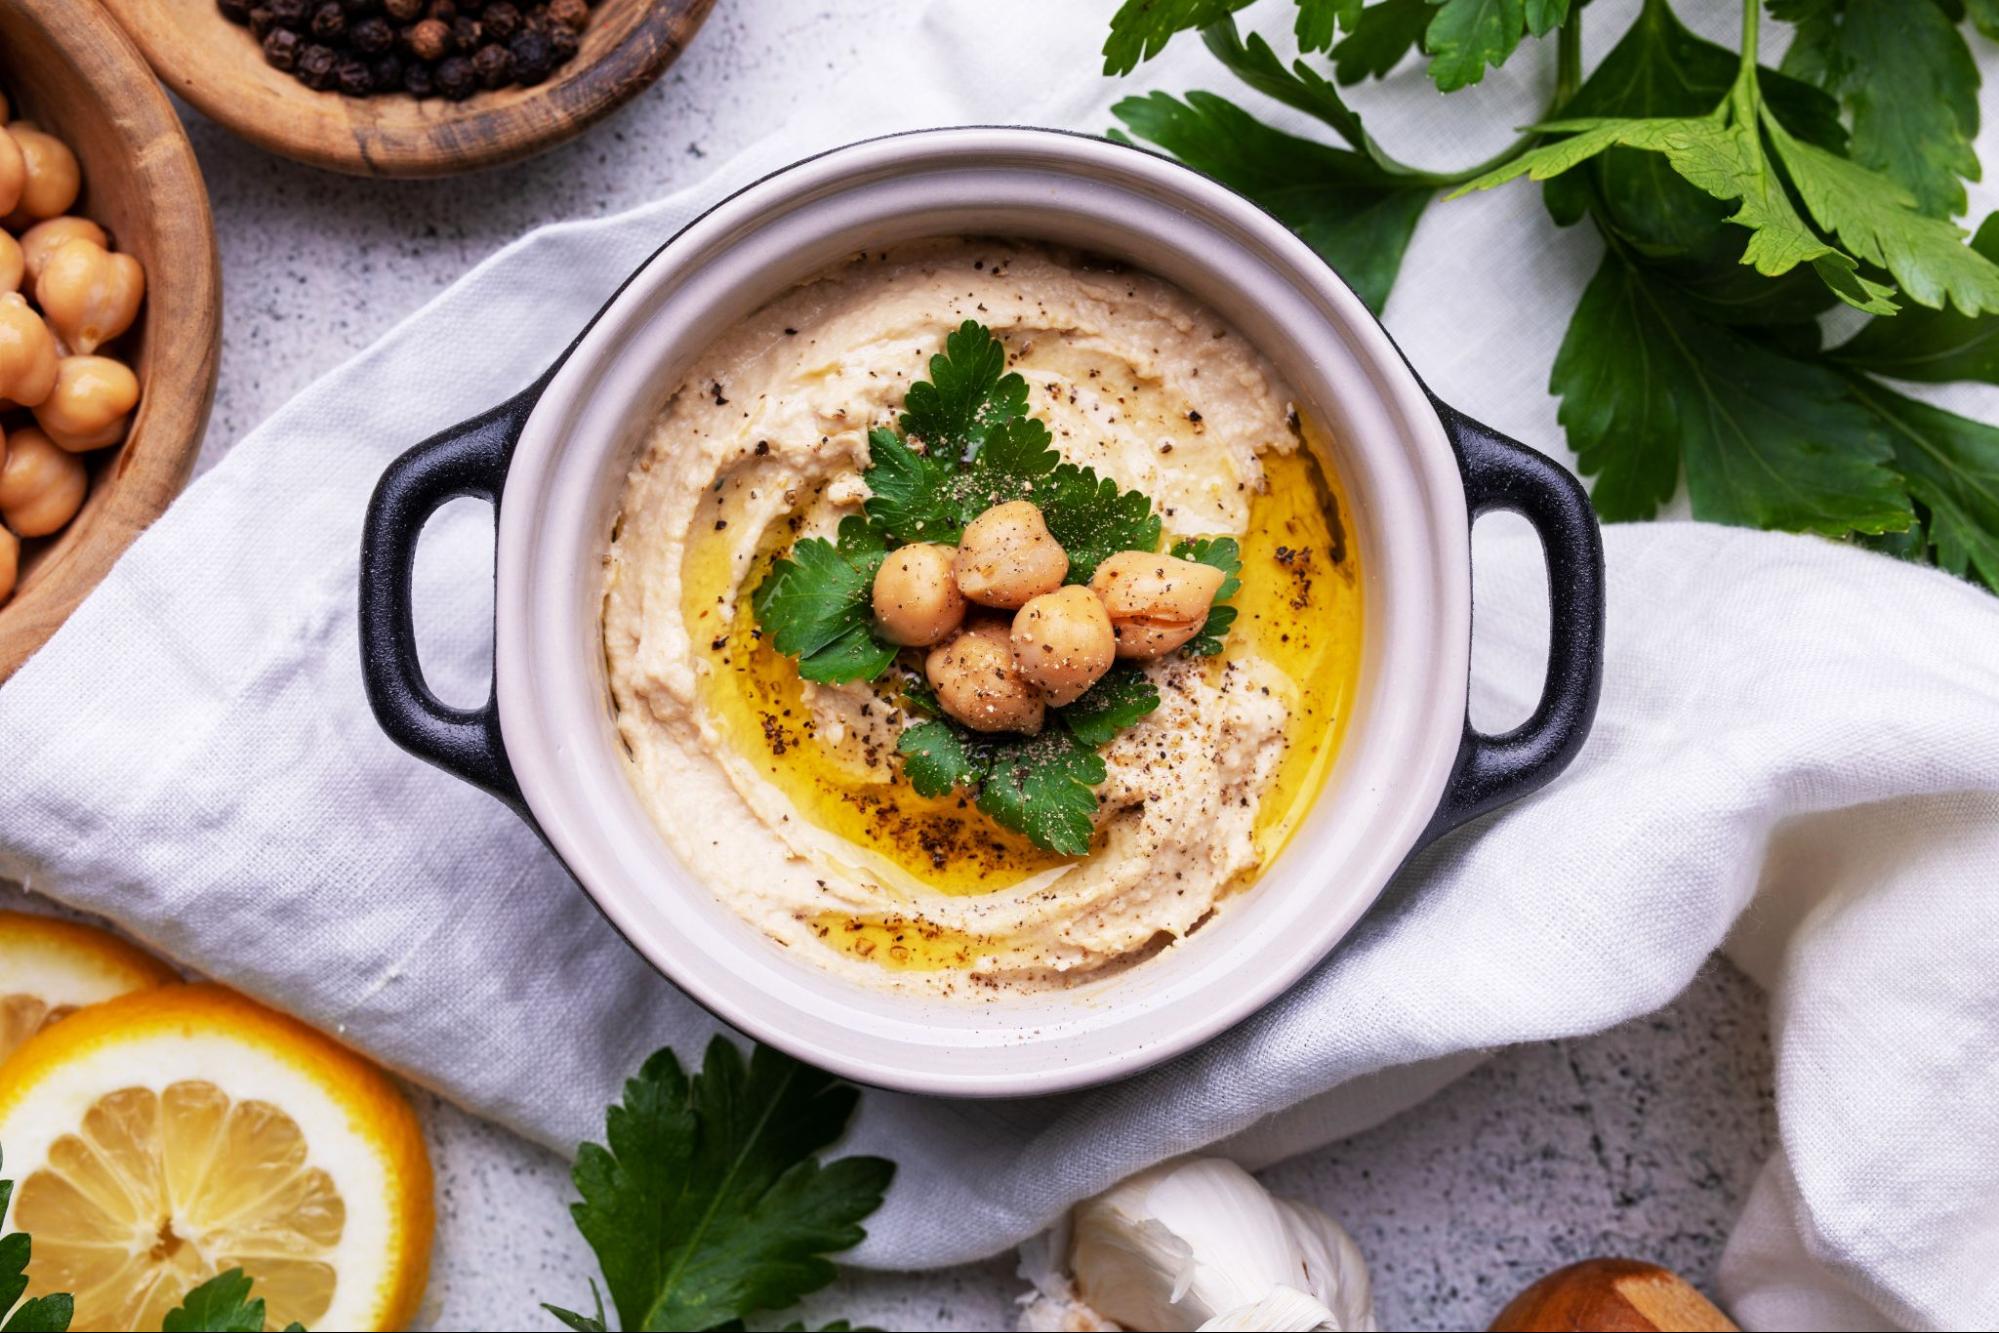 Meals That Heal - Hummus: Middle Eastern Style - The Holistic Highway